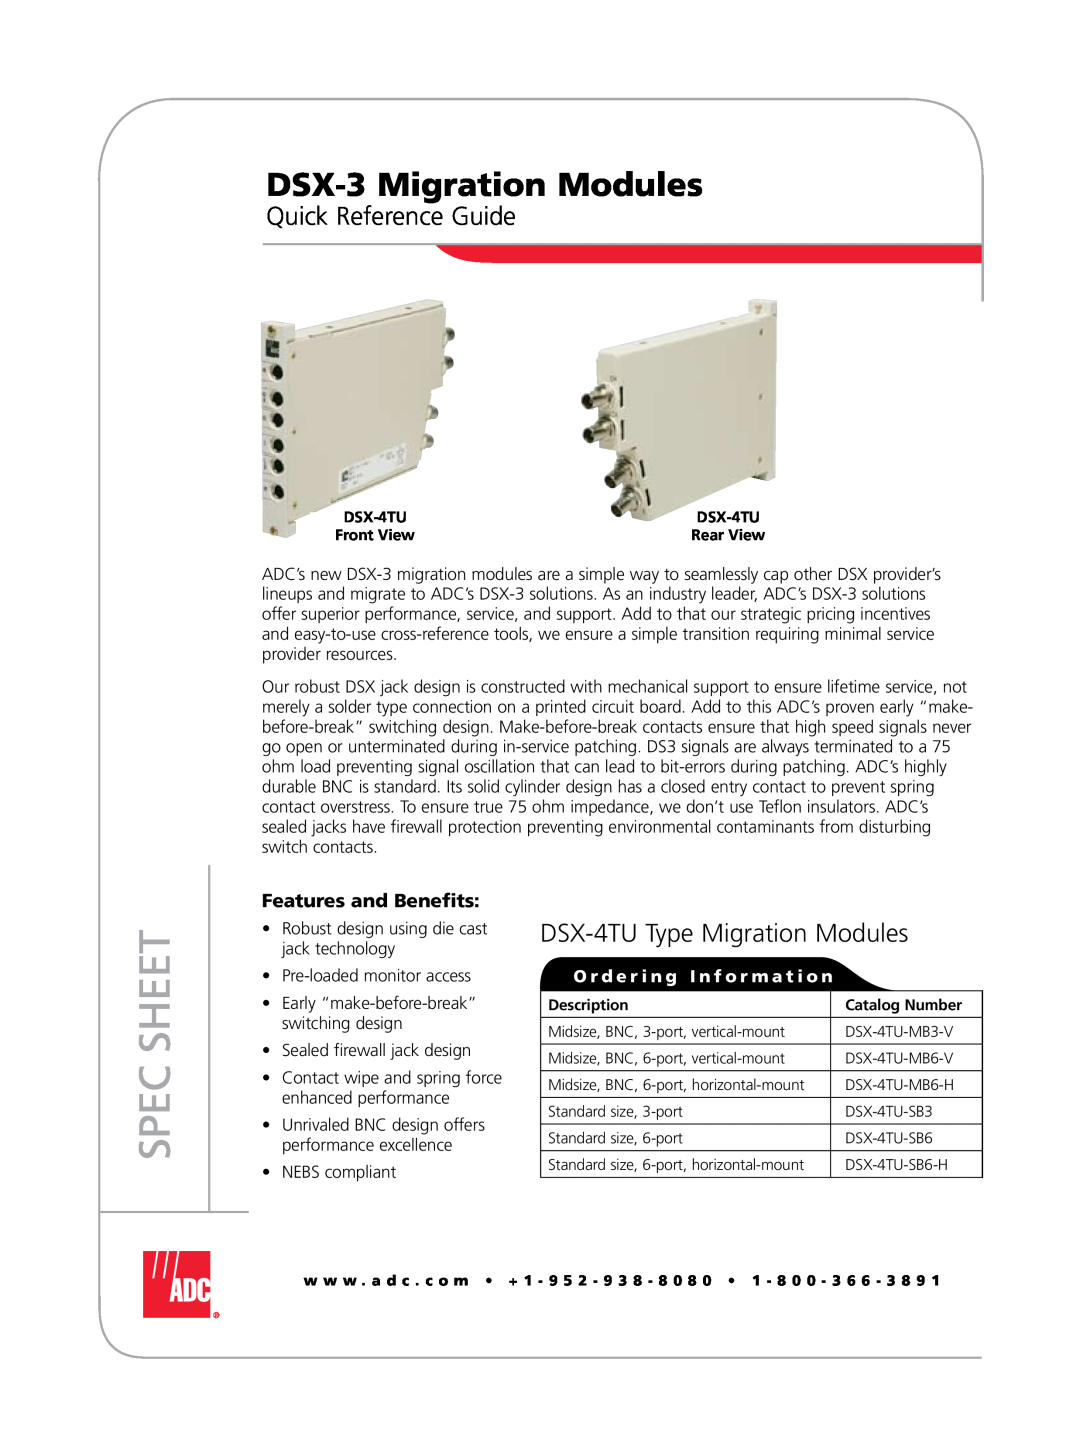 ADC DSX-3 manual Quick Reference Guide, DSX-4TU Type Migration Modules, O r d e r i n g I n f o r m a t i o n, Spec Sheet 